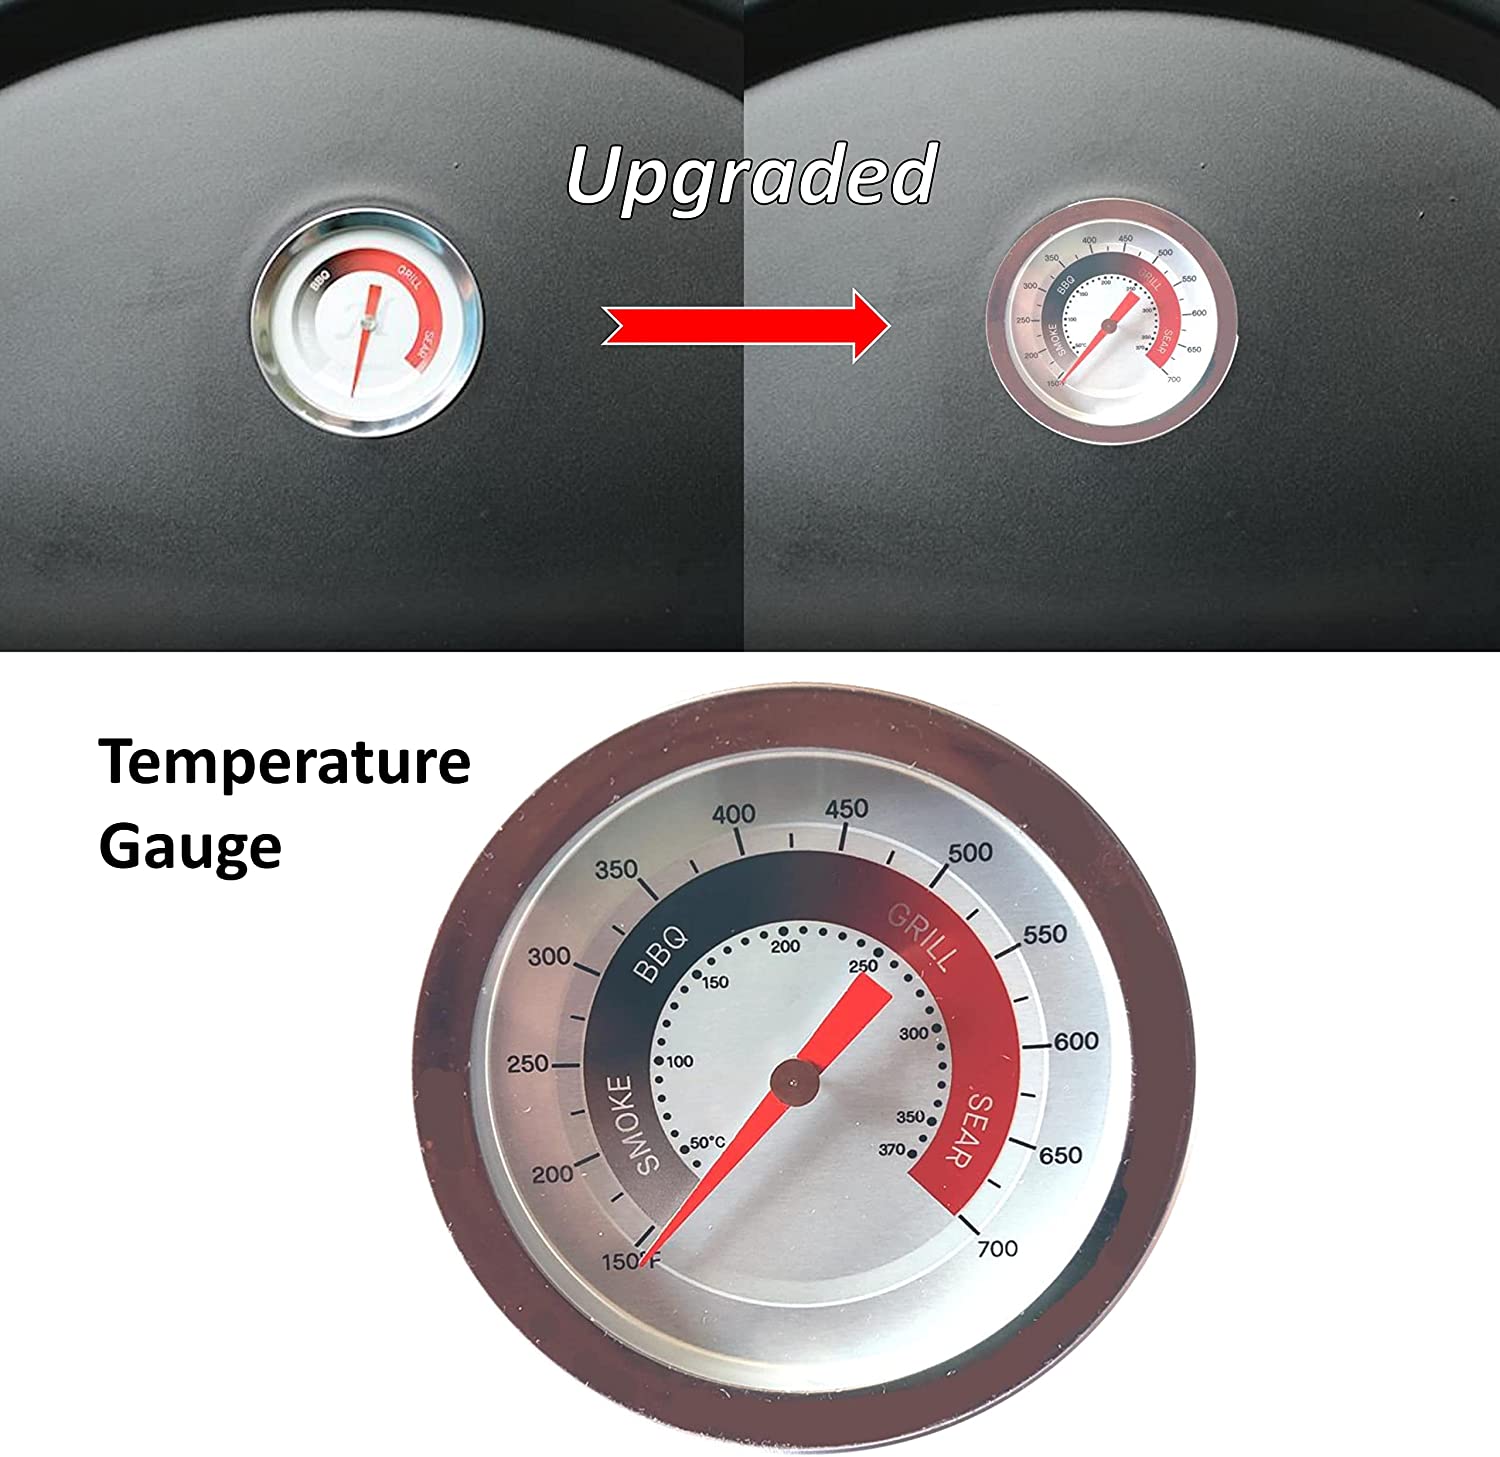 Upgraded Temperature Gauge Grill Thermometer Replacement for Masterbuilt Gravity Series 560/1050 Digital Charcoal Grill and Smoker